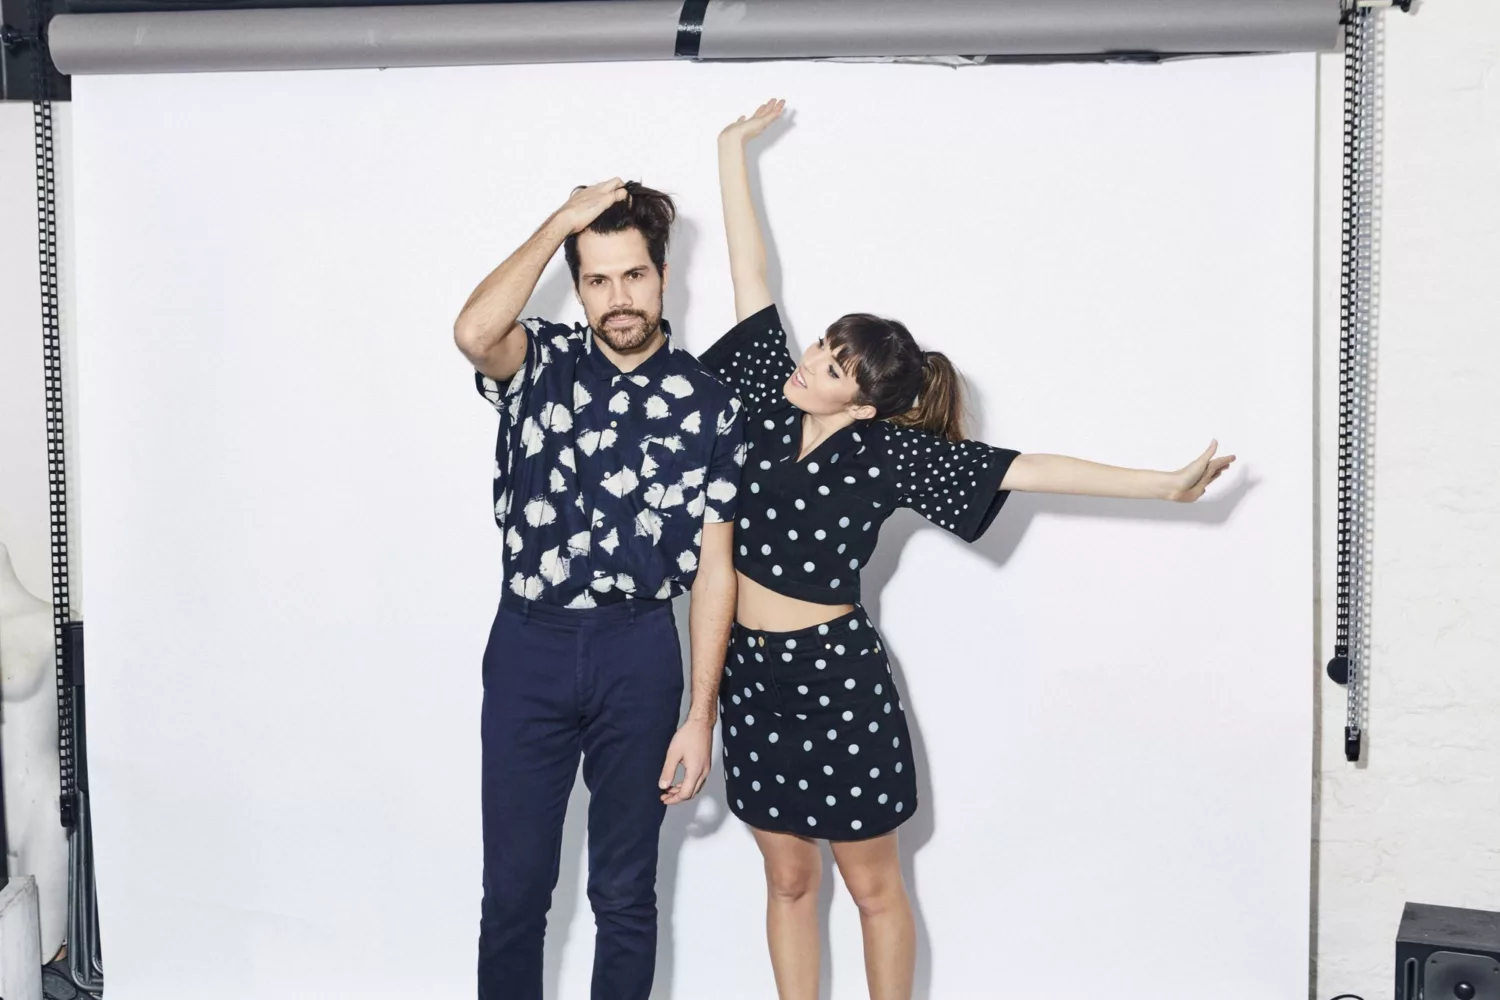 Oh Wonder’s new album ‘Ultralife’ is out in June